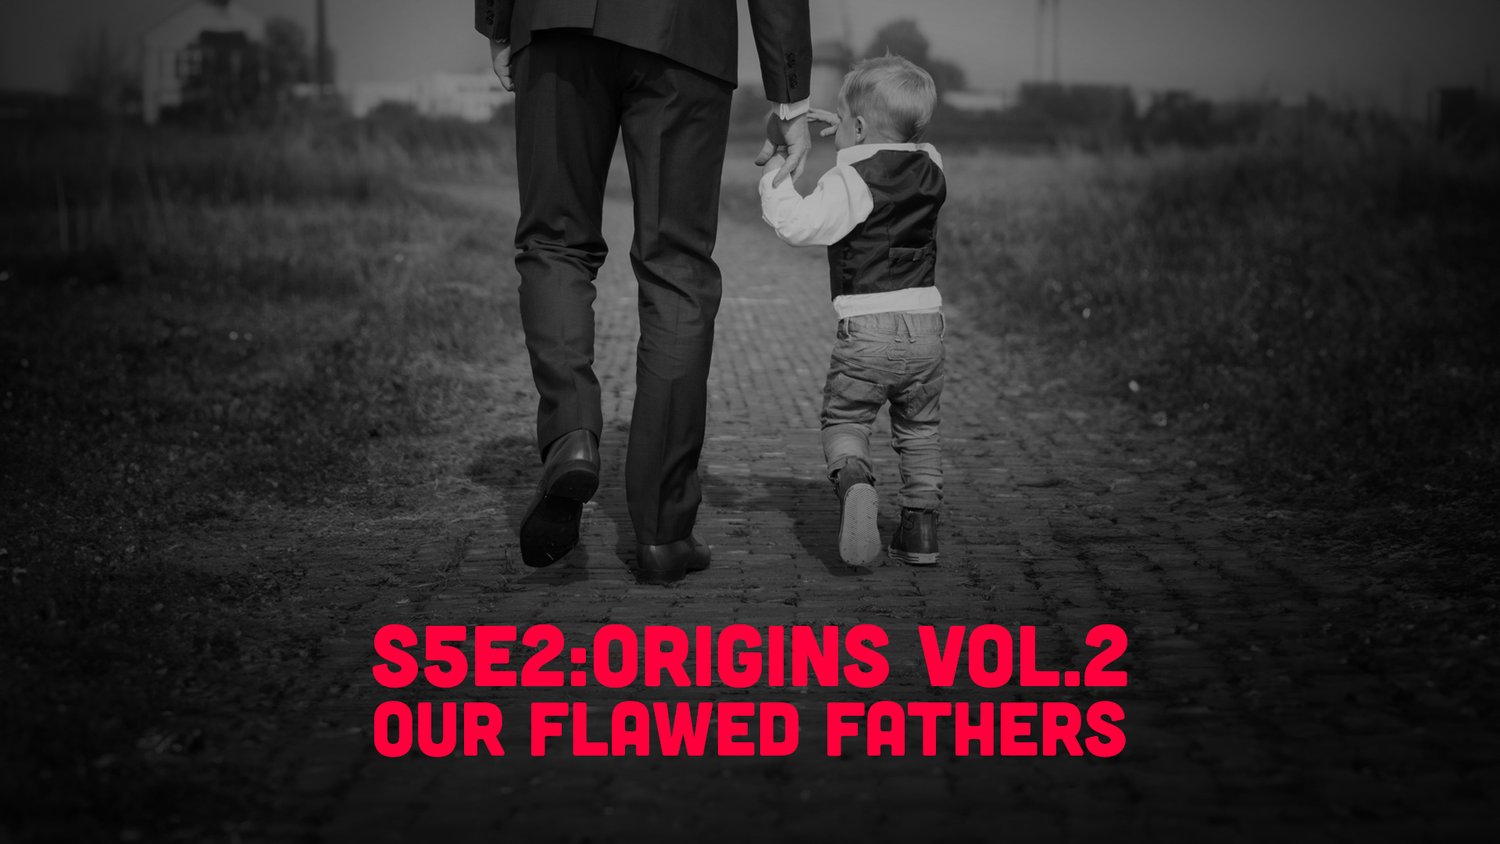 S5E2 - Origins Vol.2: Our Flawed Fathers